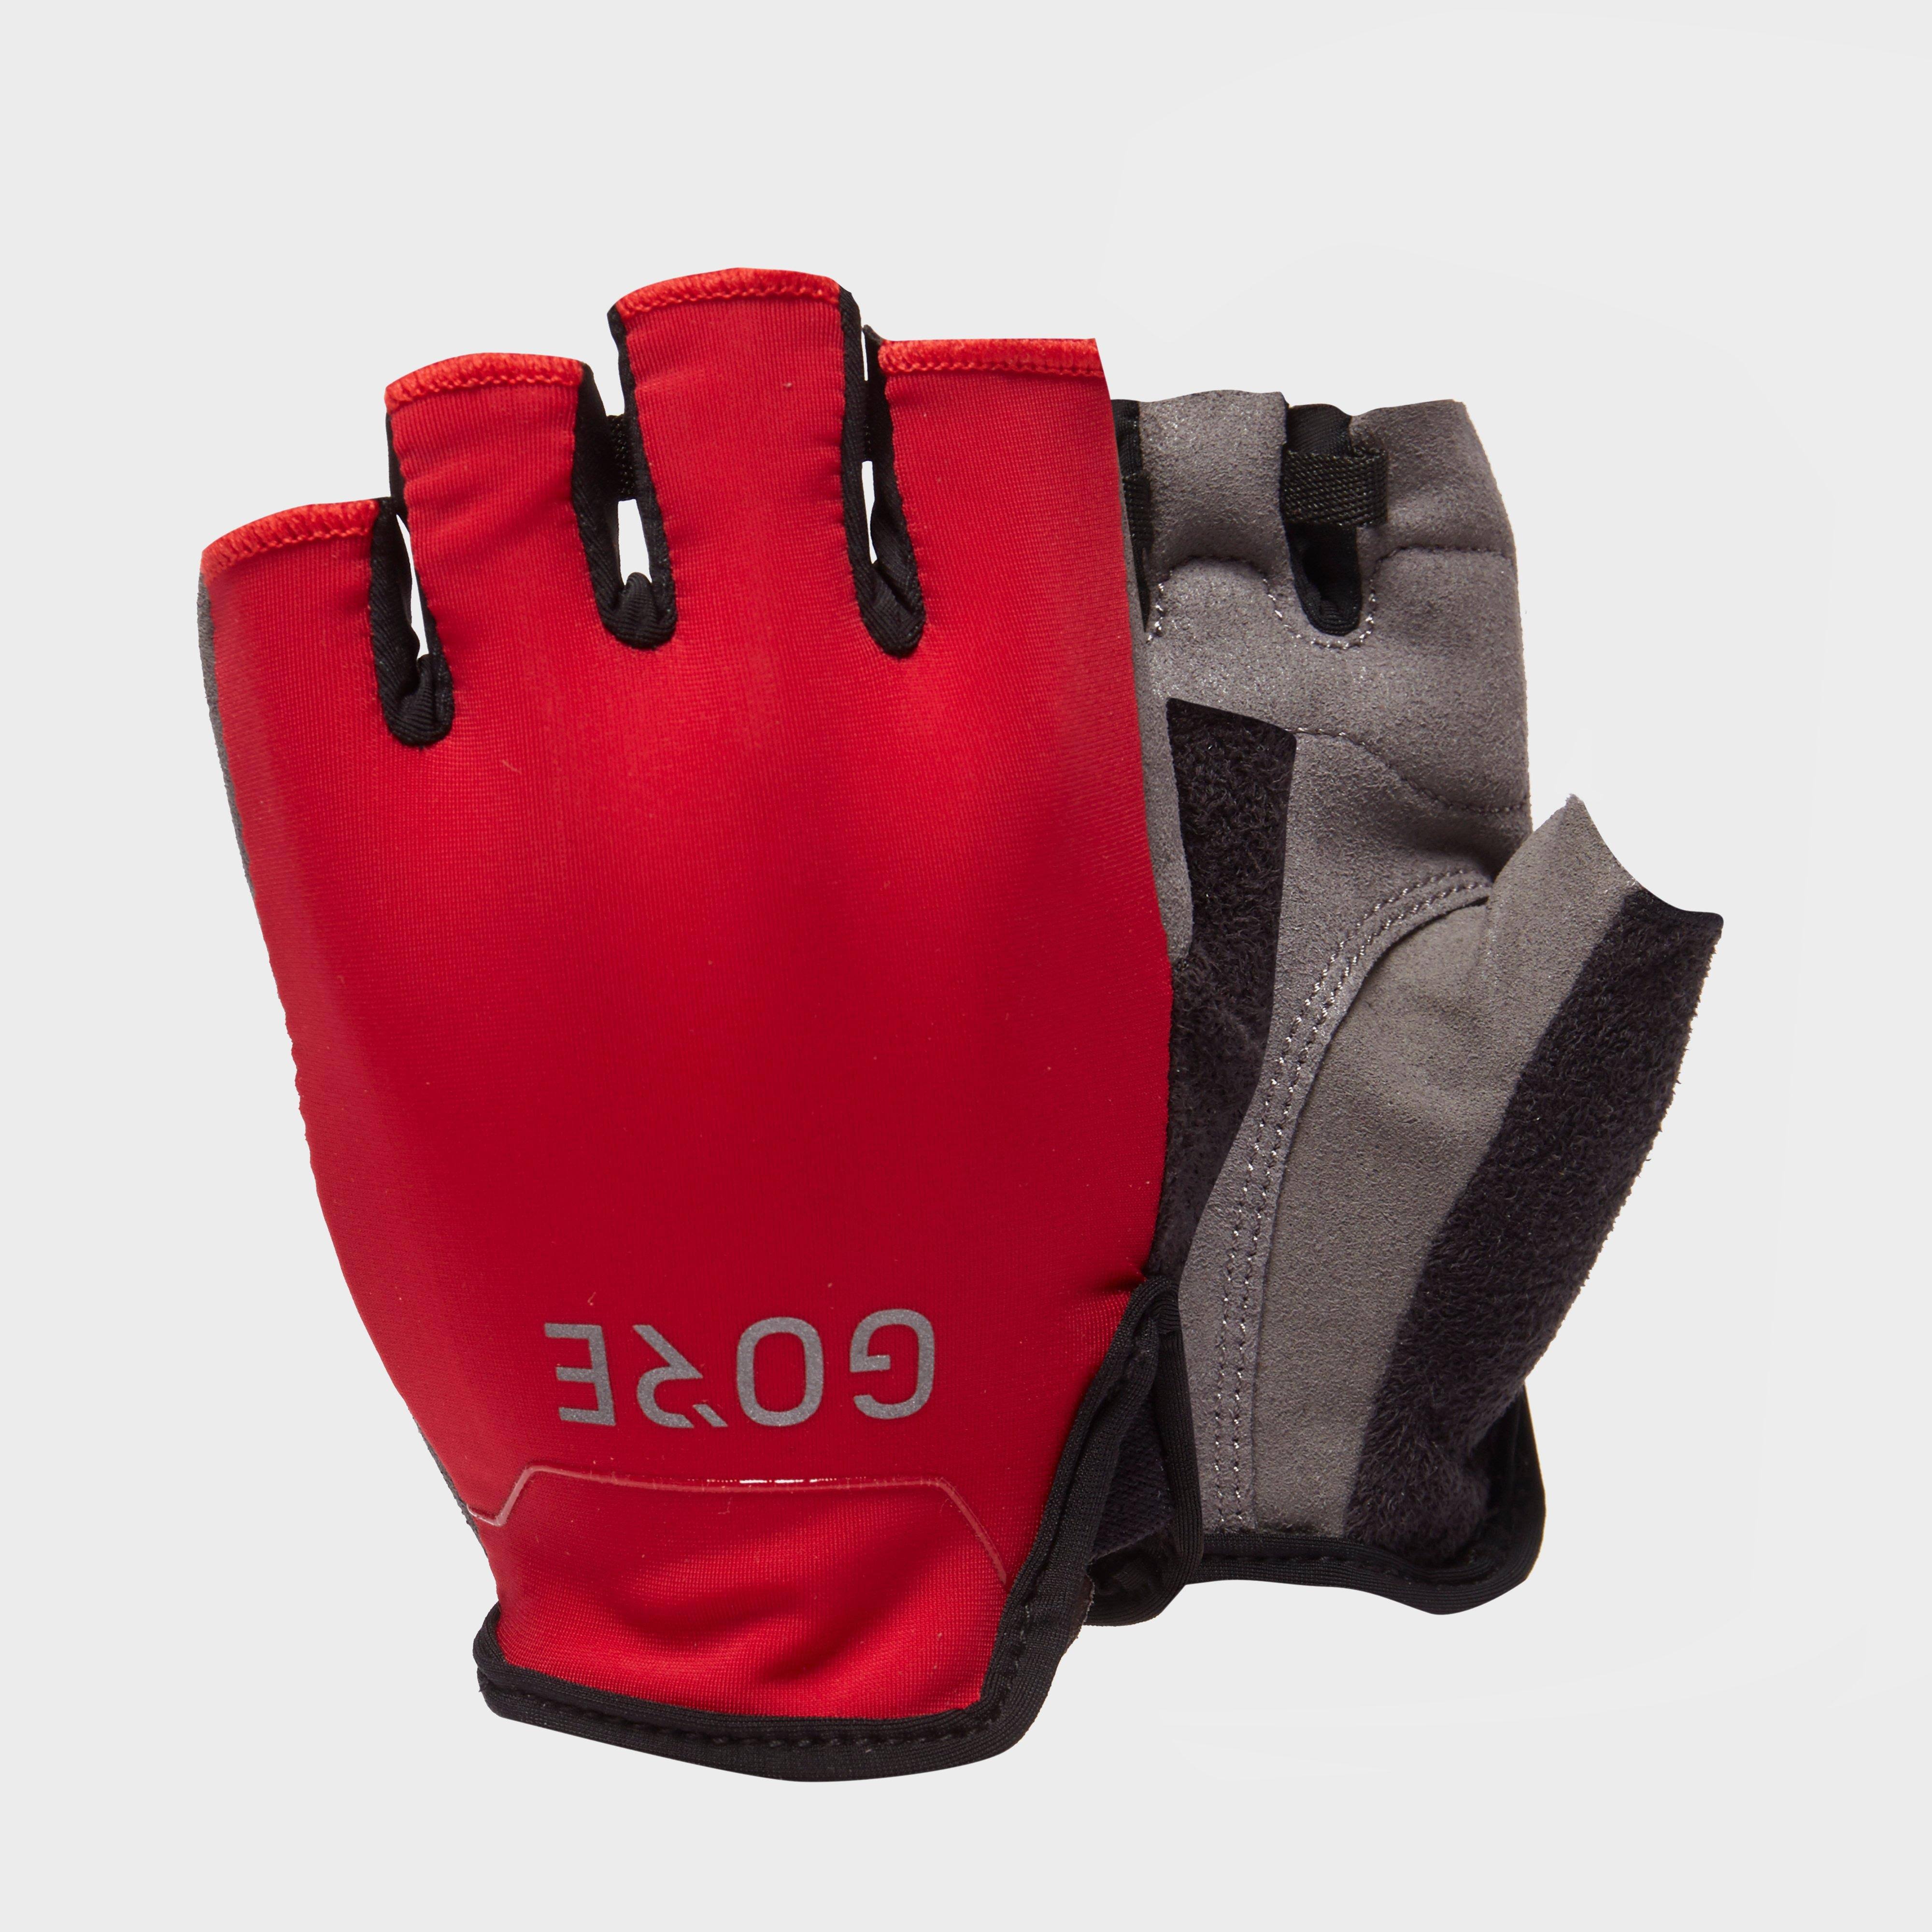 Gore C3 Short Finger Cycling Gloves - Red